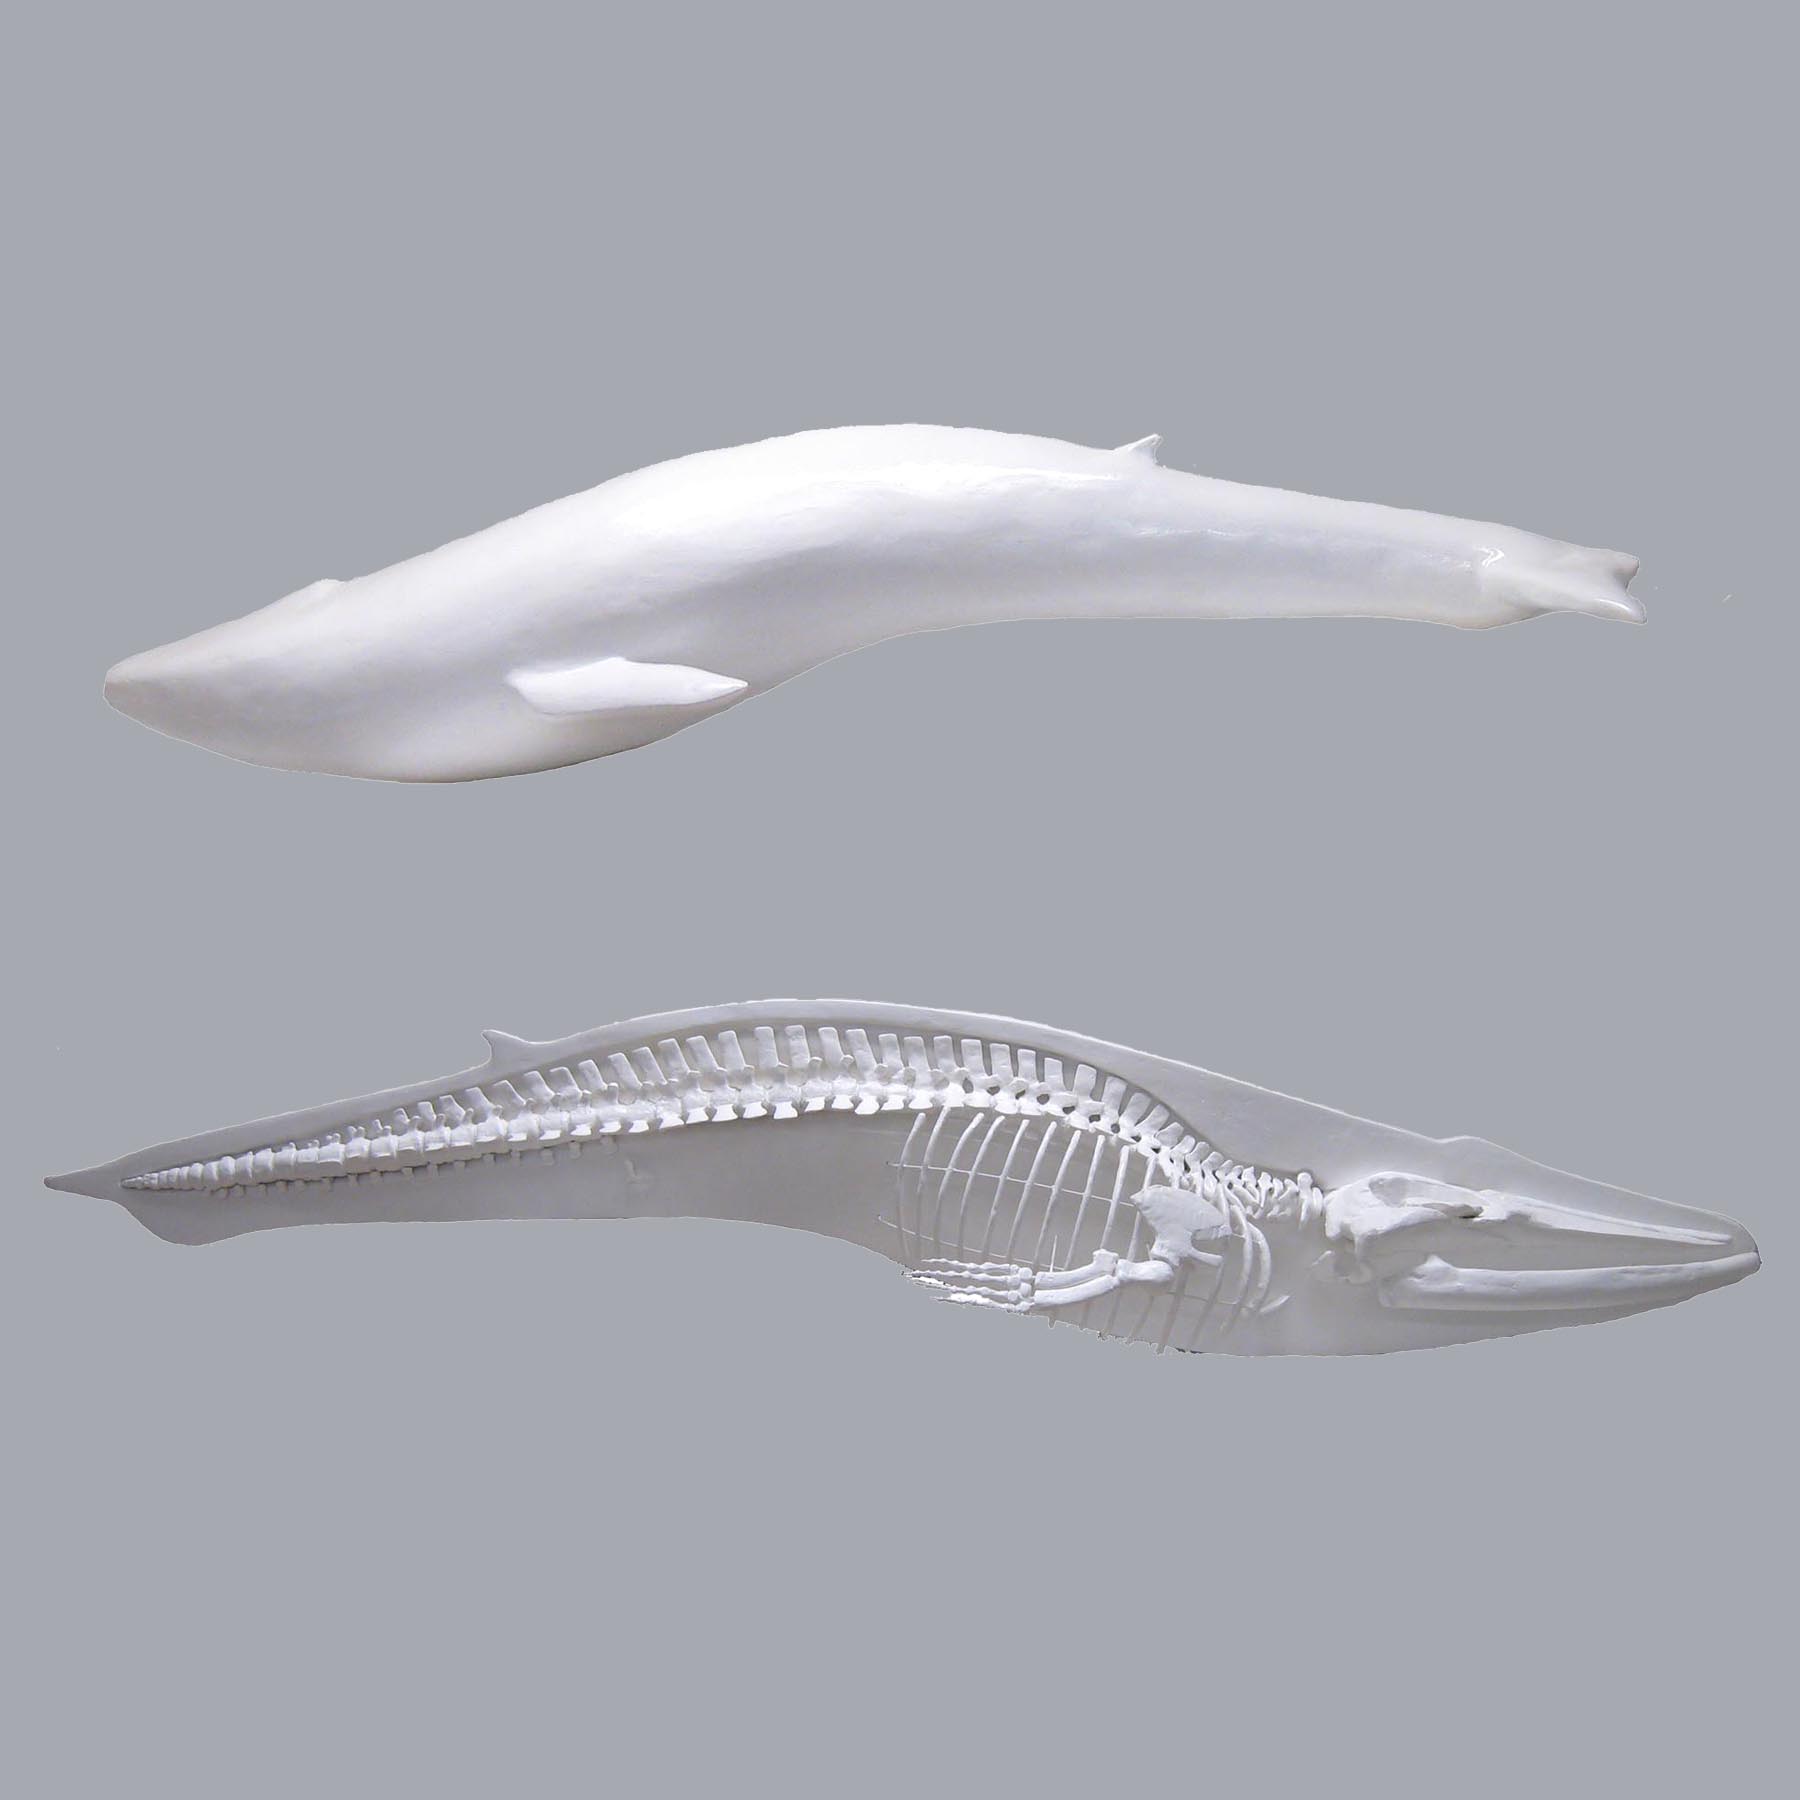 Half-fleshed blue whale skeleton at 1:20 scale